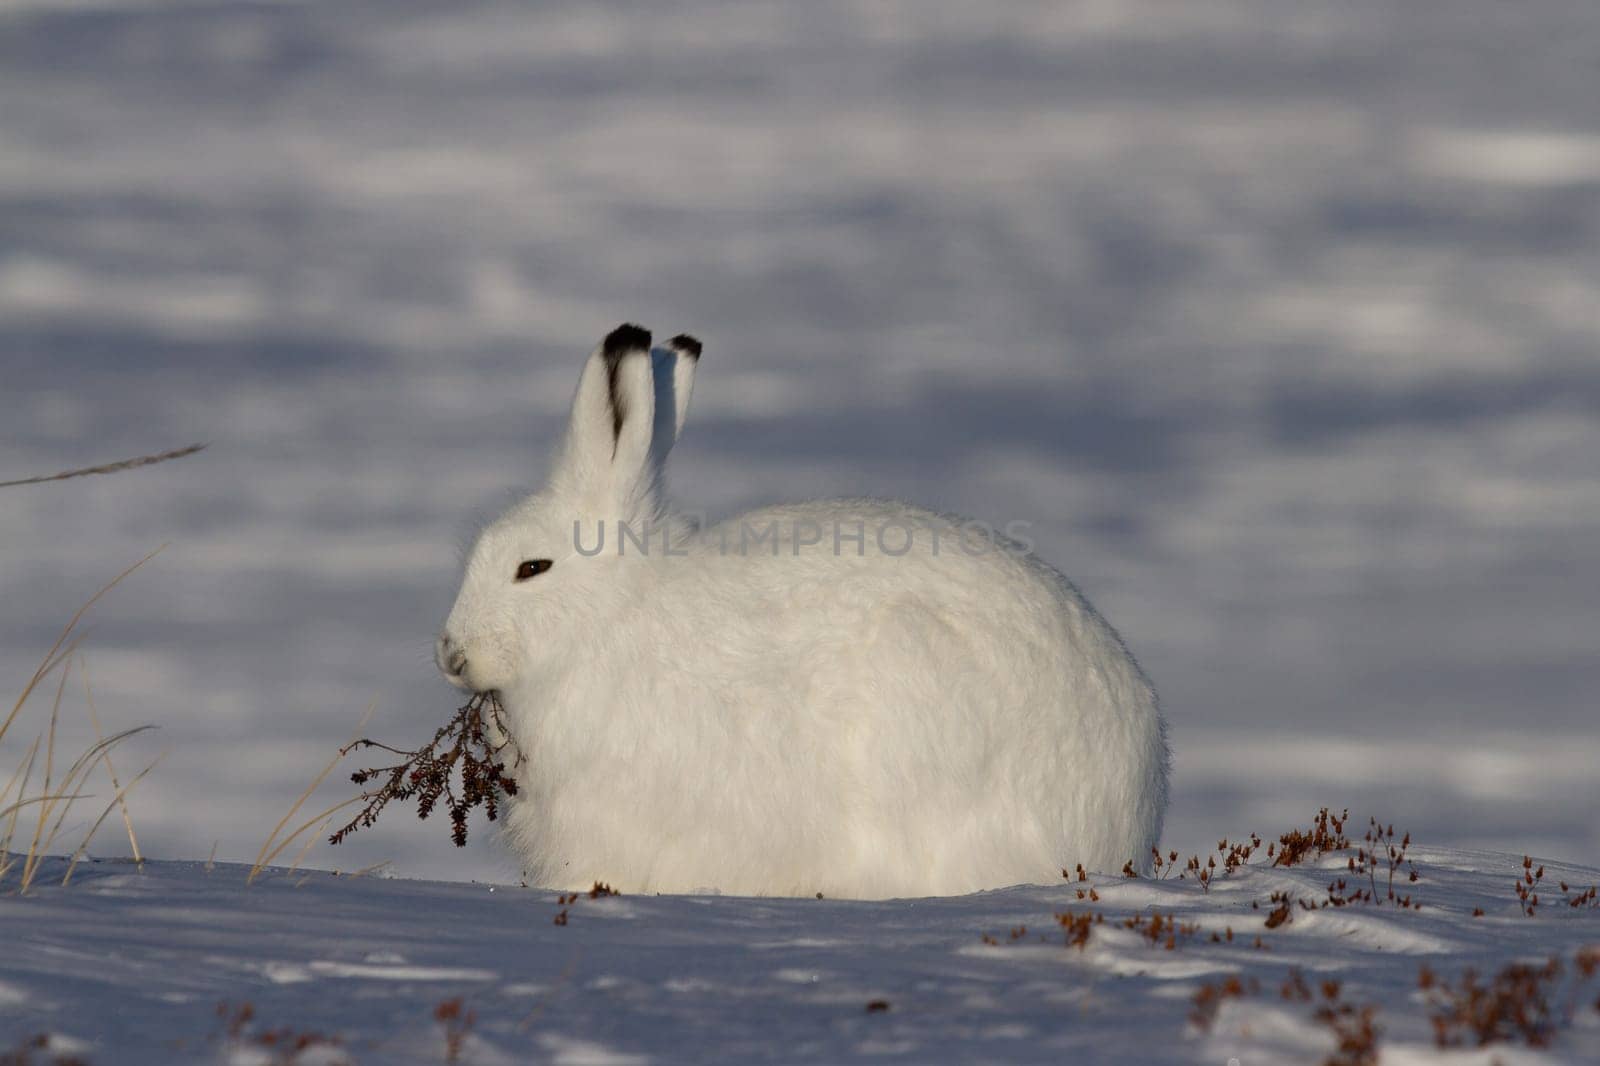 Arctic hare in winter coat chewing on a willow branch with snow in the background by Granchinho